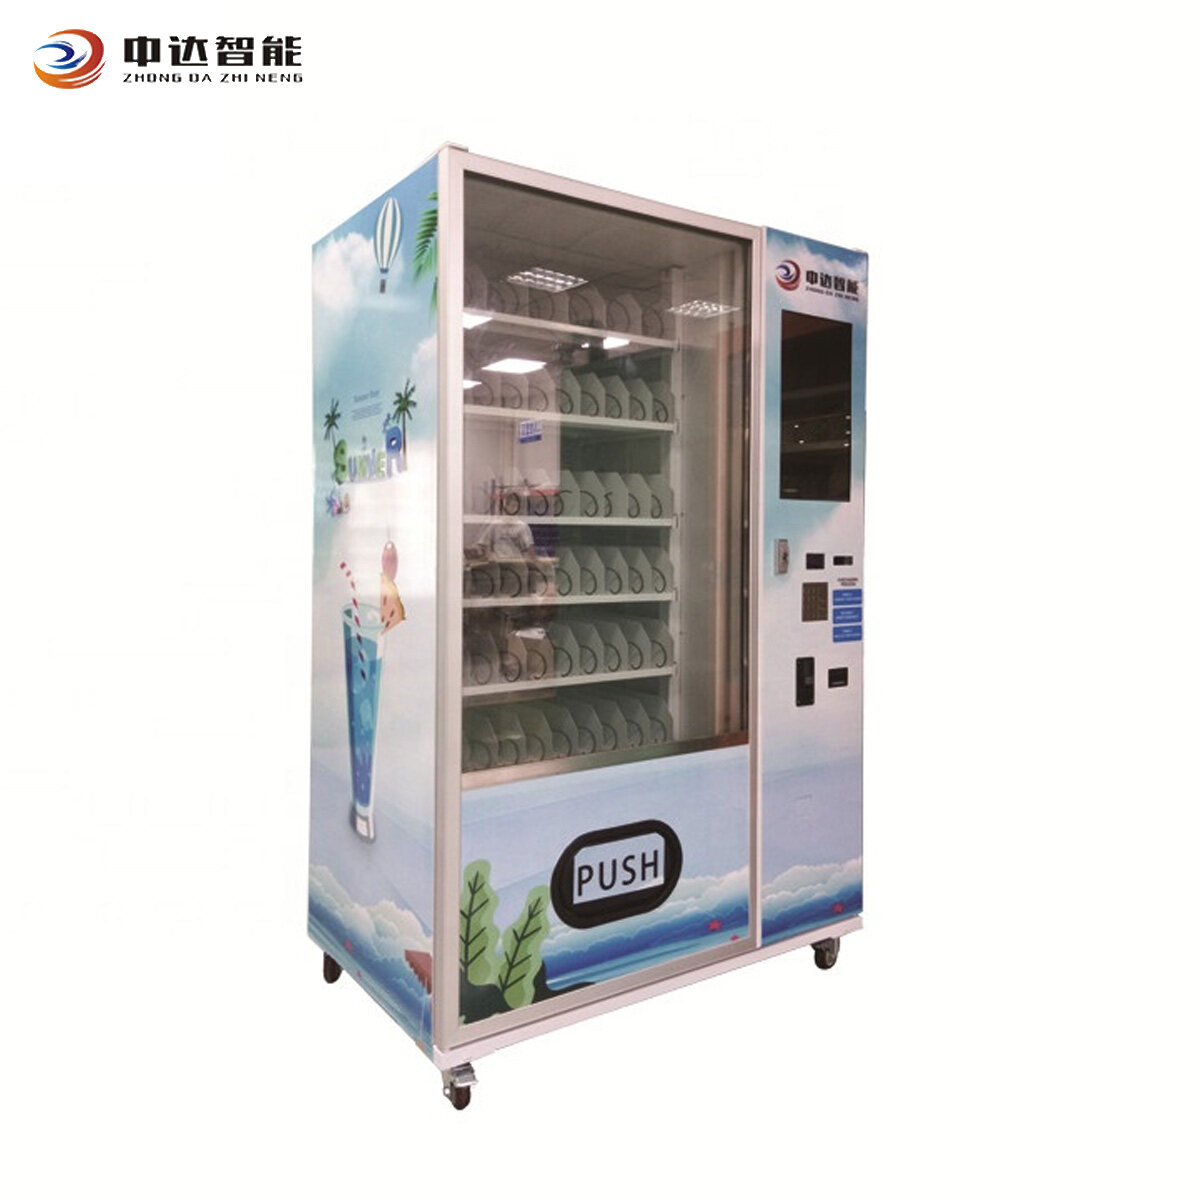 snack drink vending machine combo For Sale,snack and drink combo vending machine Manufacturer,Wholesale frozen drink vending machine,Custom bottle drink vending machine